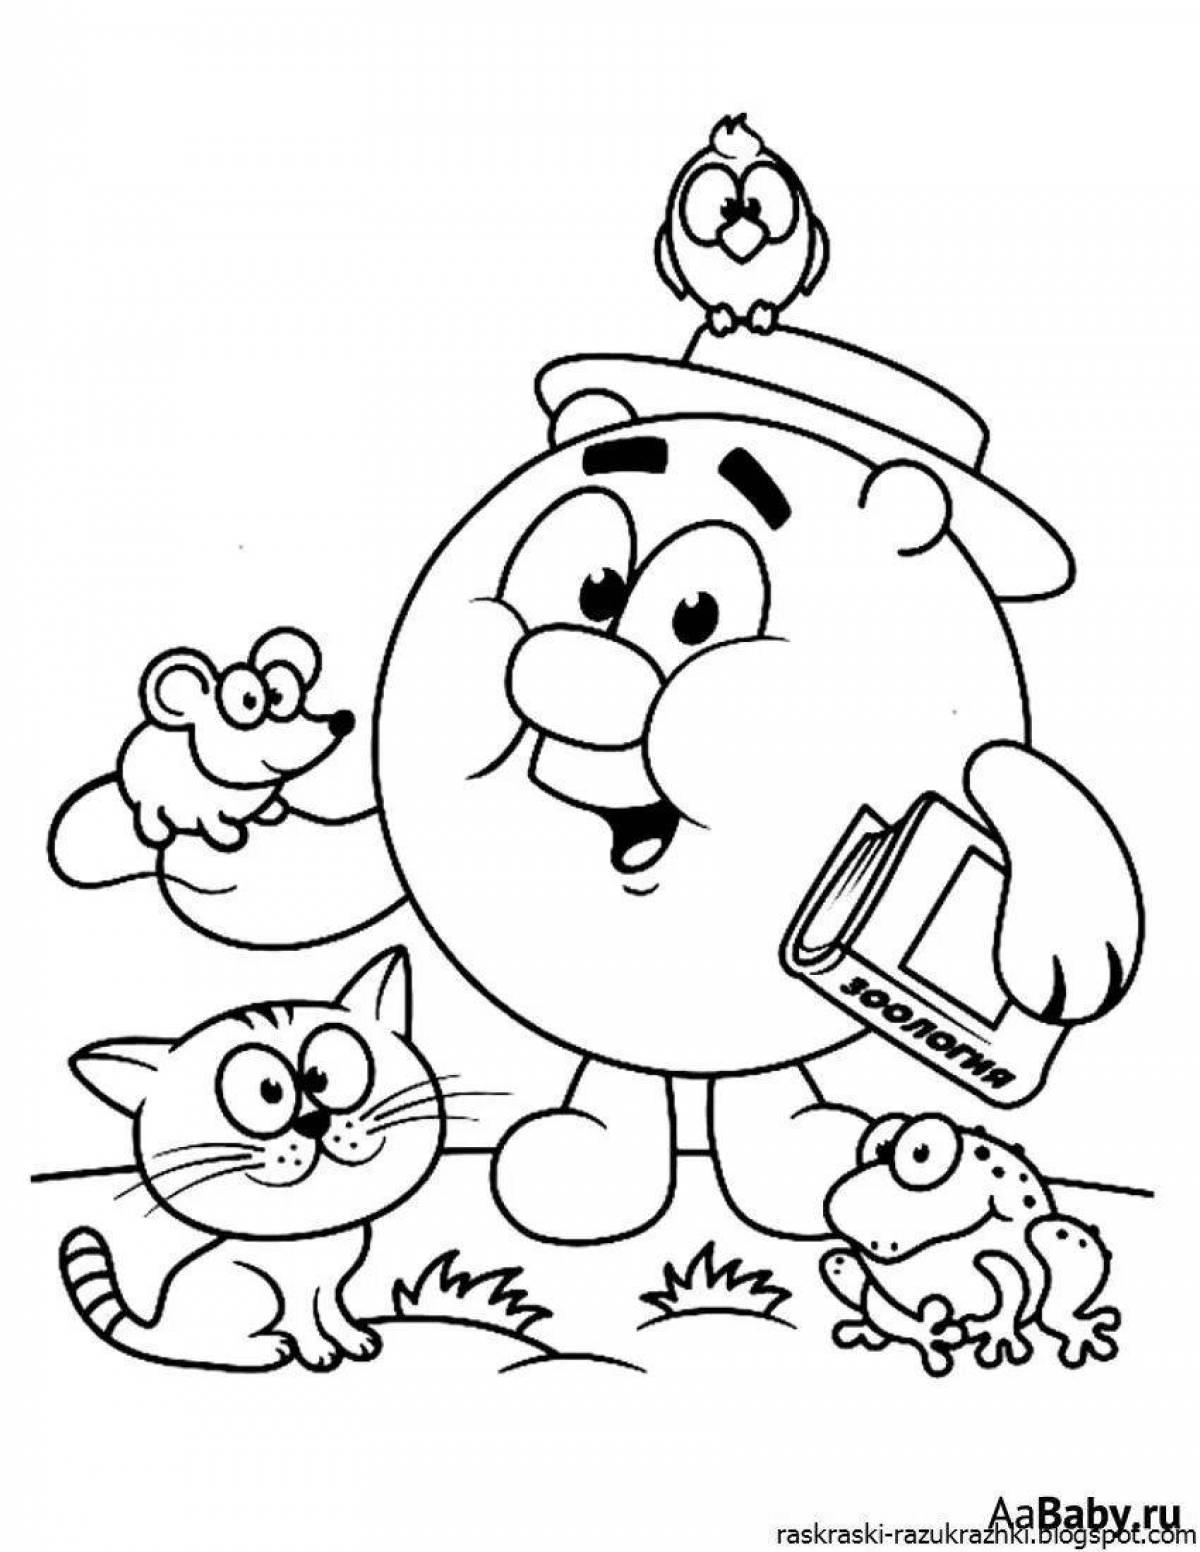 Coloring book with playful cartoon characters for children 5-6 years old